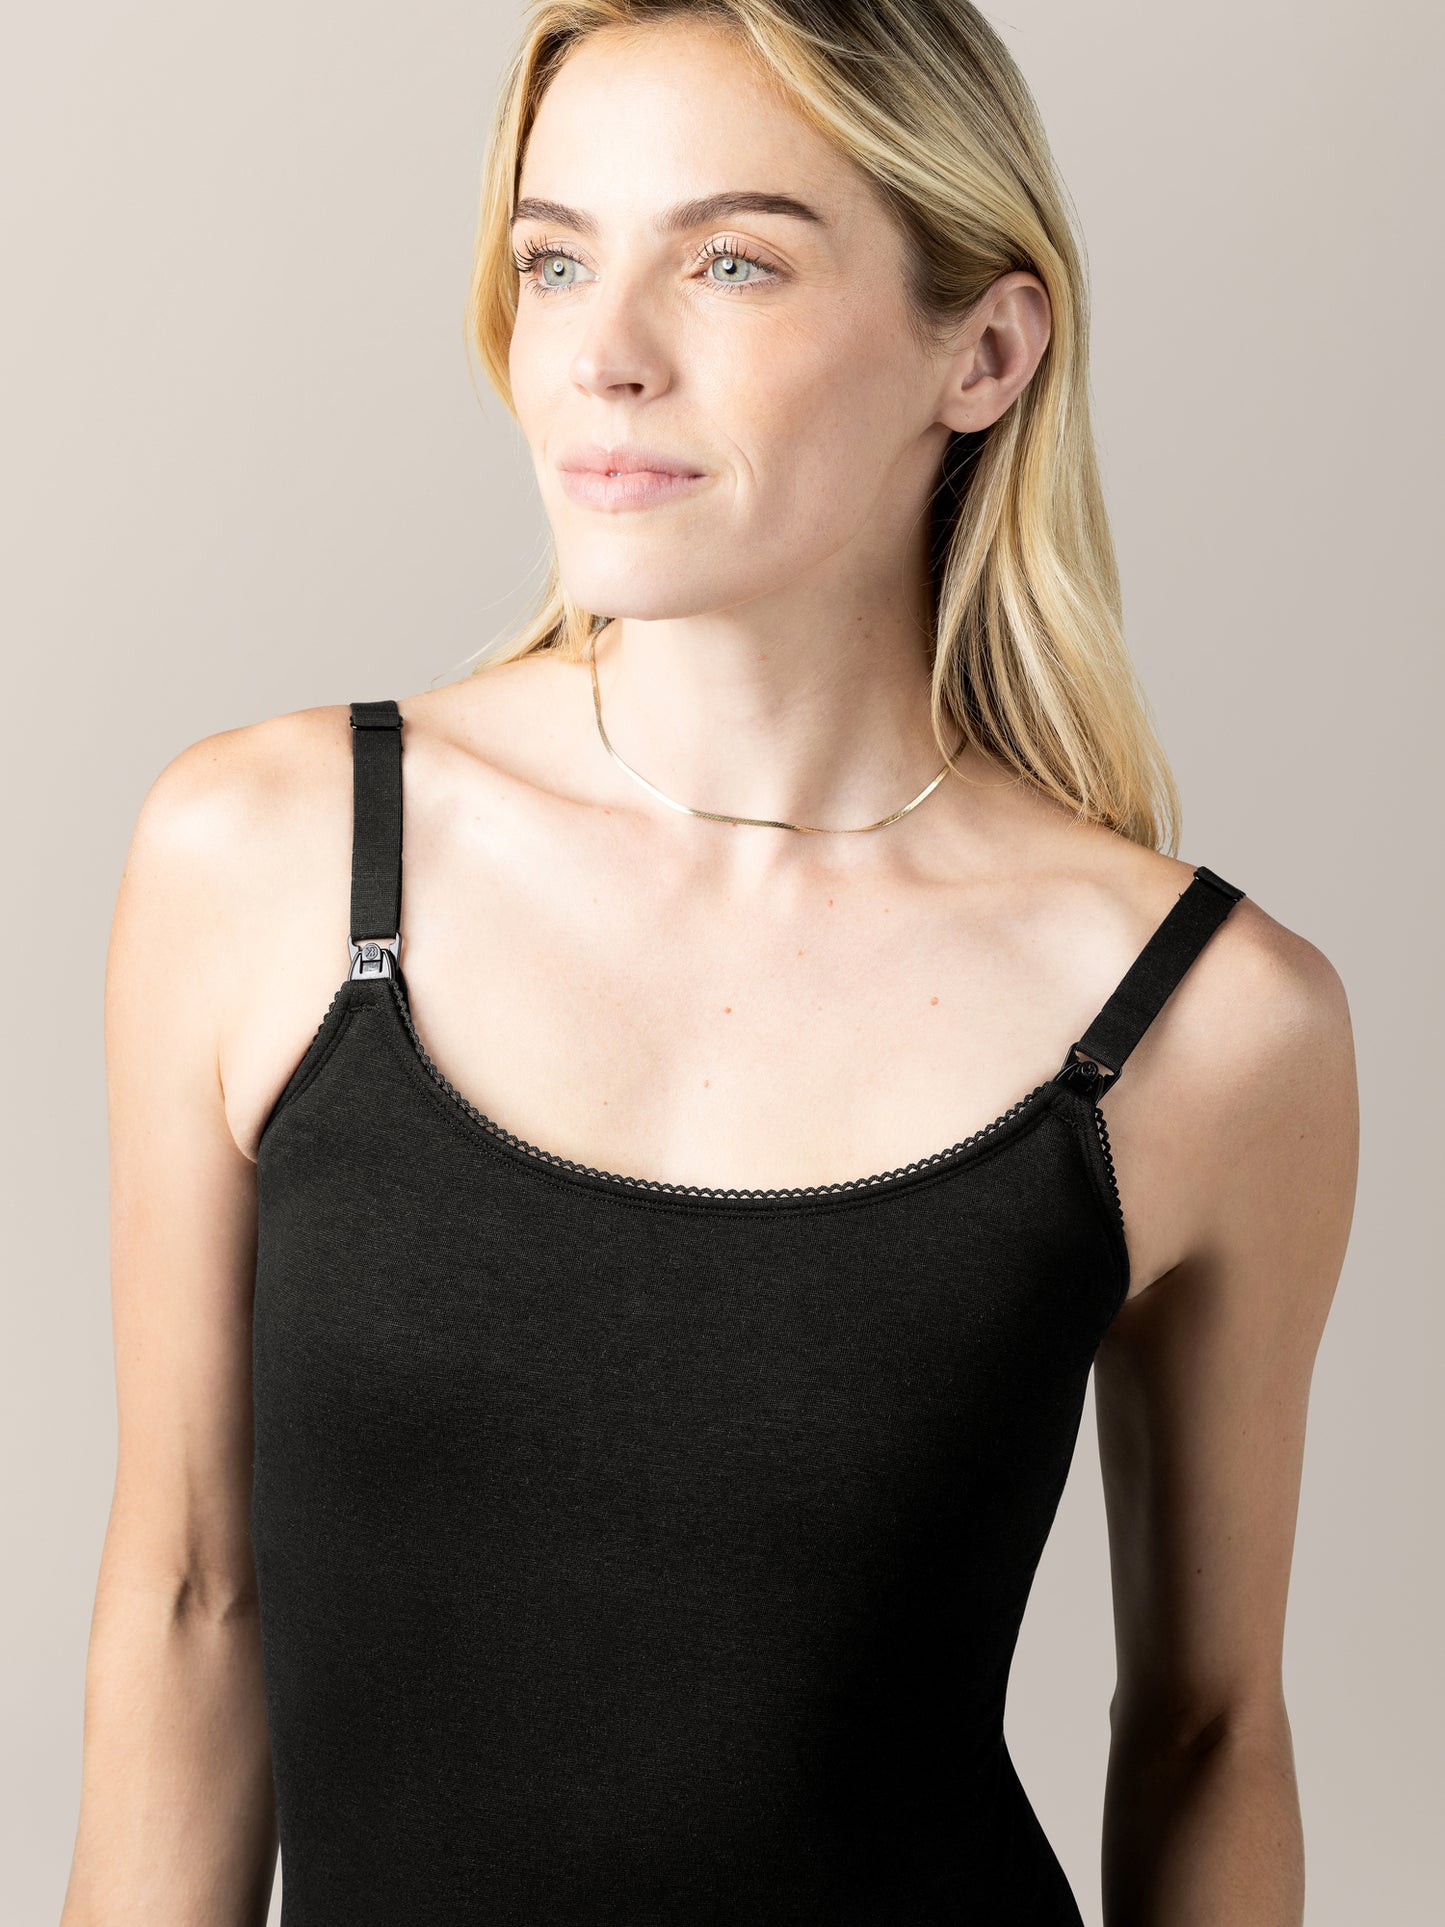 Close up of model wearing the Picot Trim Nursing Camisole in Black showing trim detail. @model_info:Mia is wearing a Small.